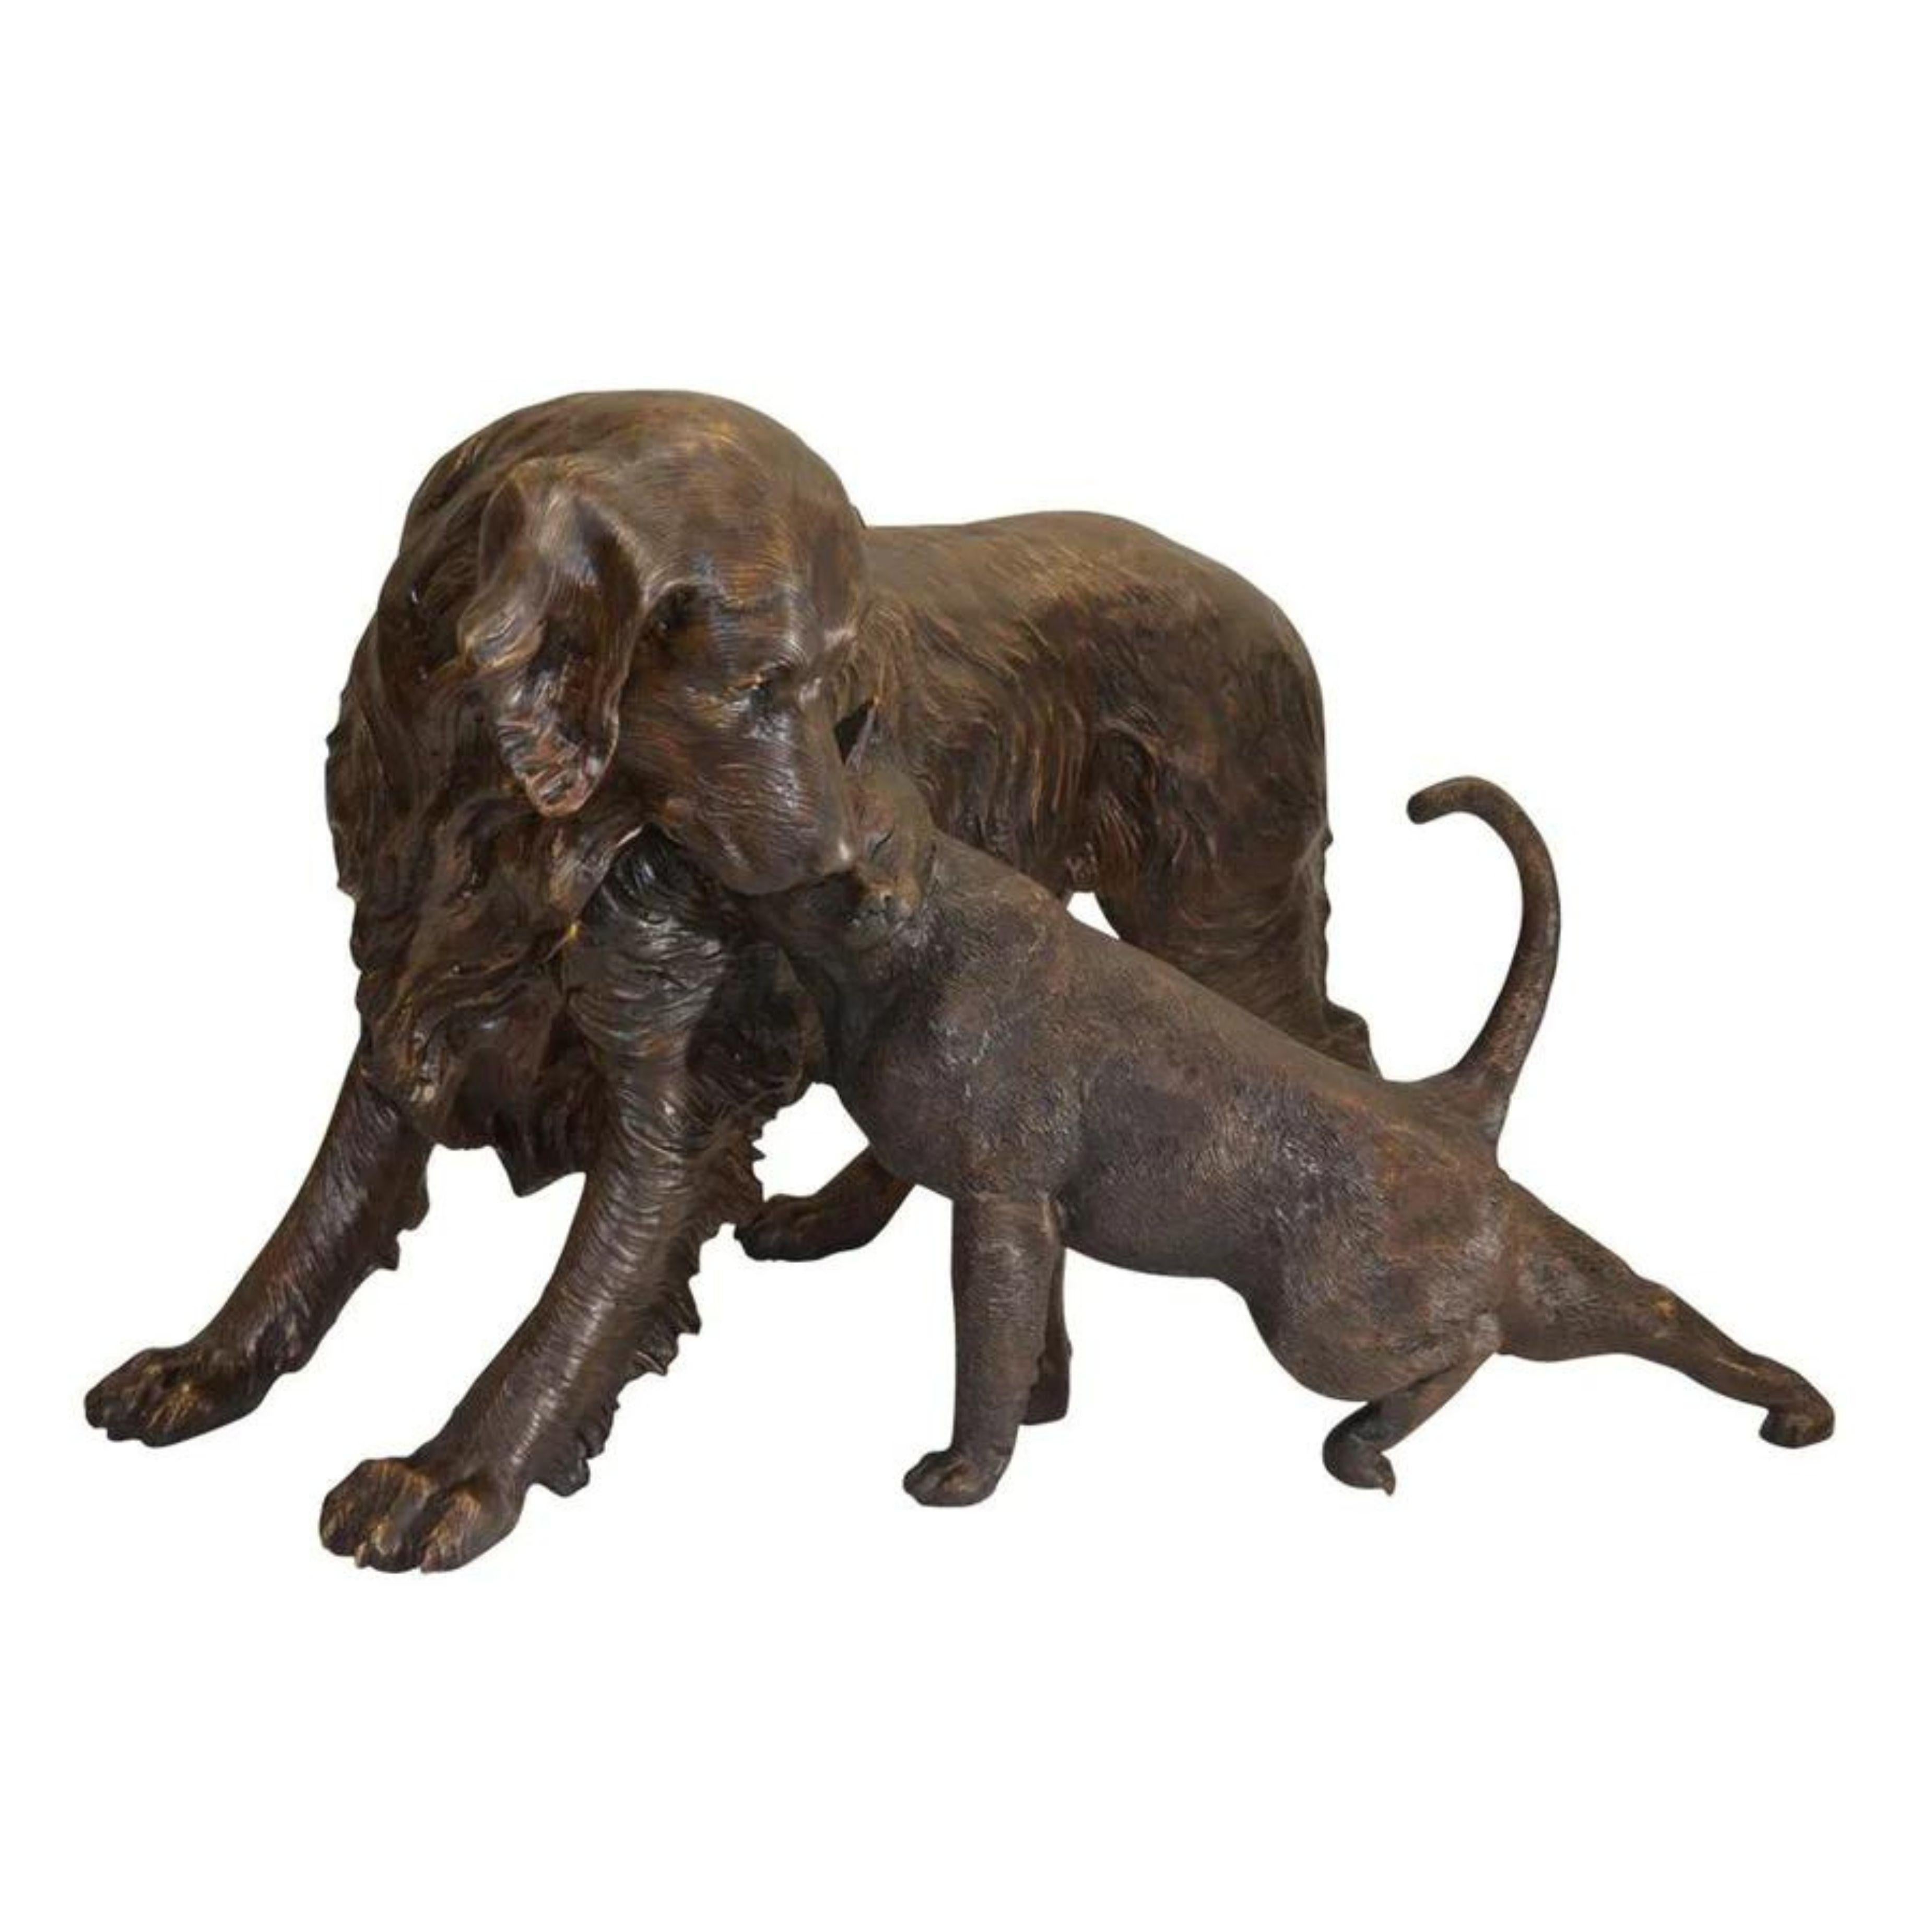 A beautifully designed moment captured forever with our limited edition, custom made lost-wax bronze statue. The golden retriever dog serenely looks down at the cat while it stretches forward, rubbing up against the dog. This intricately designed